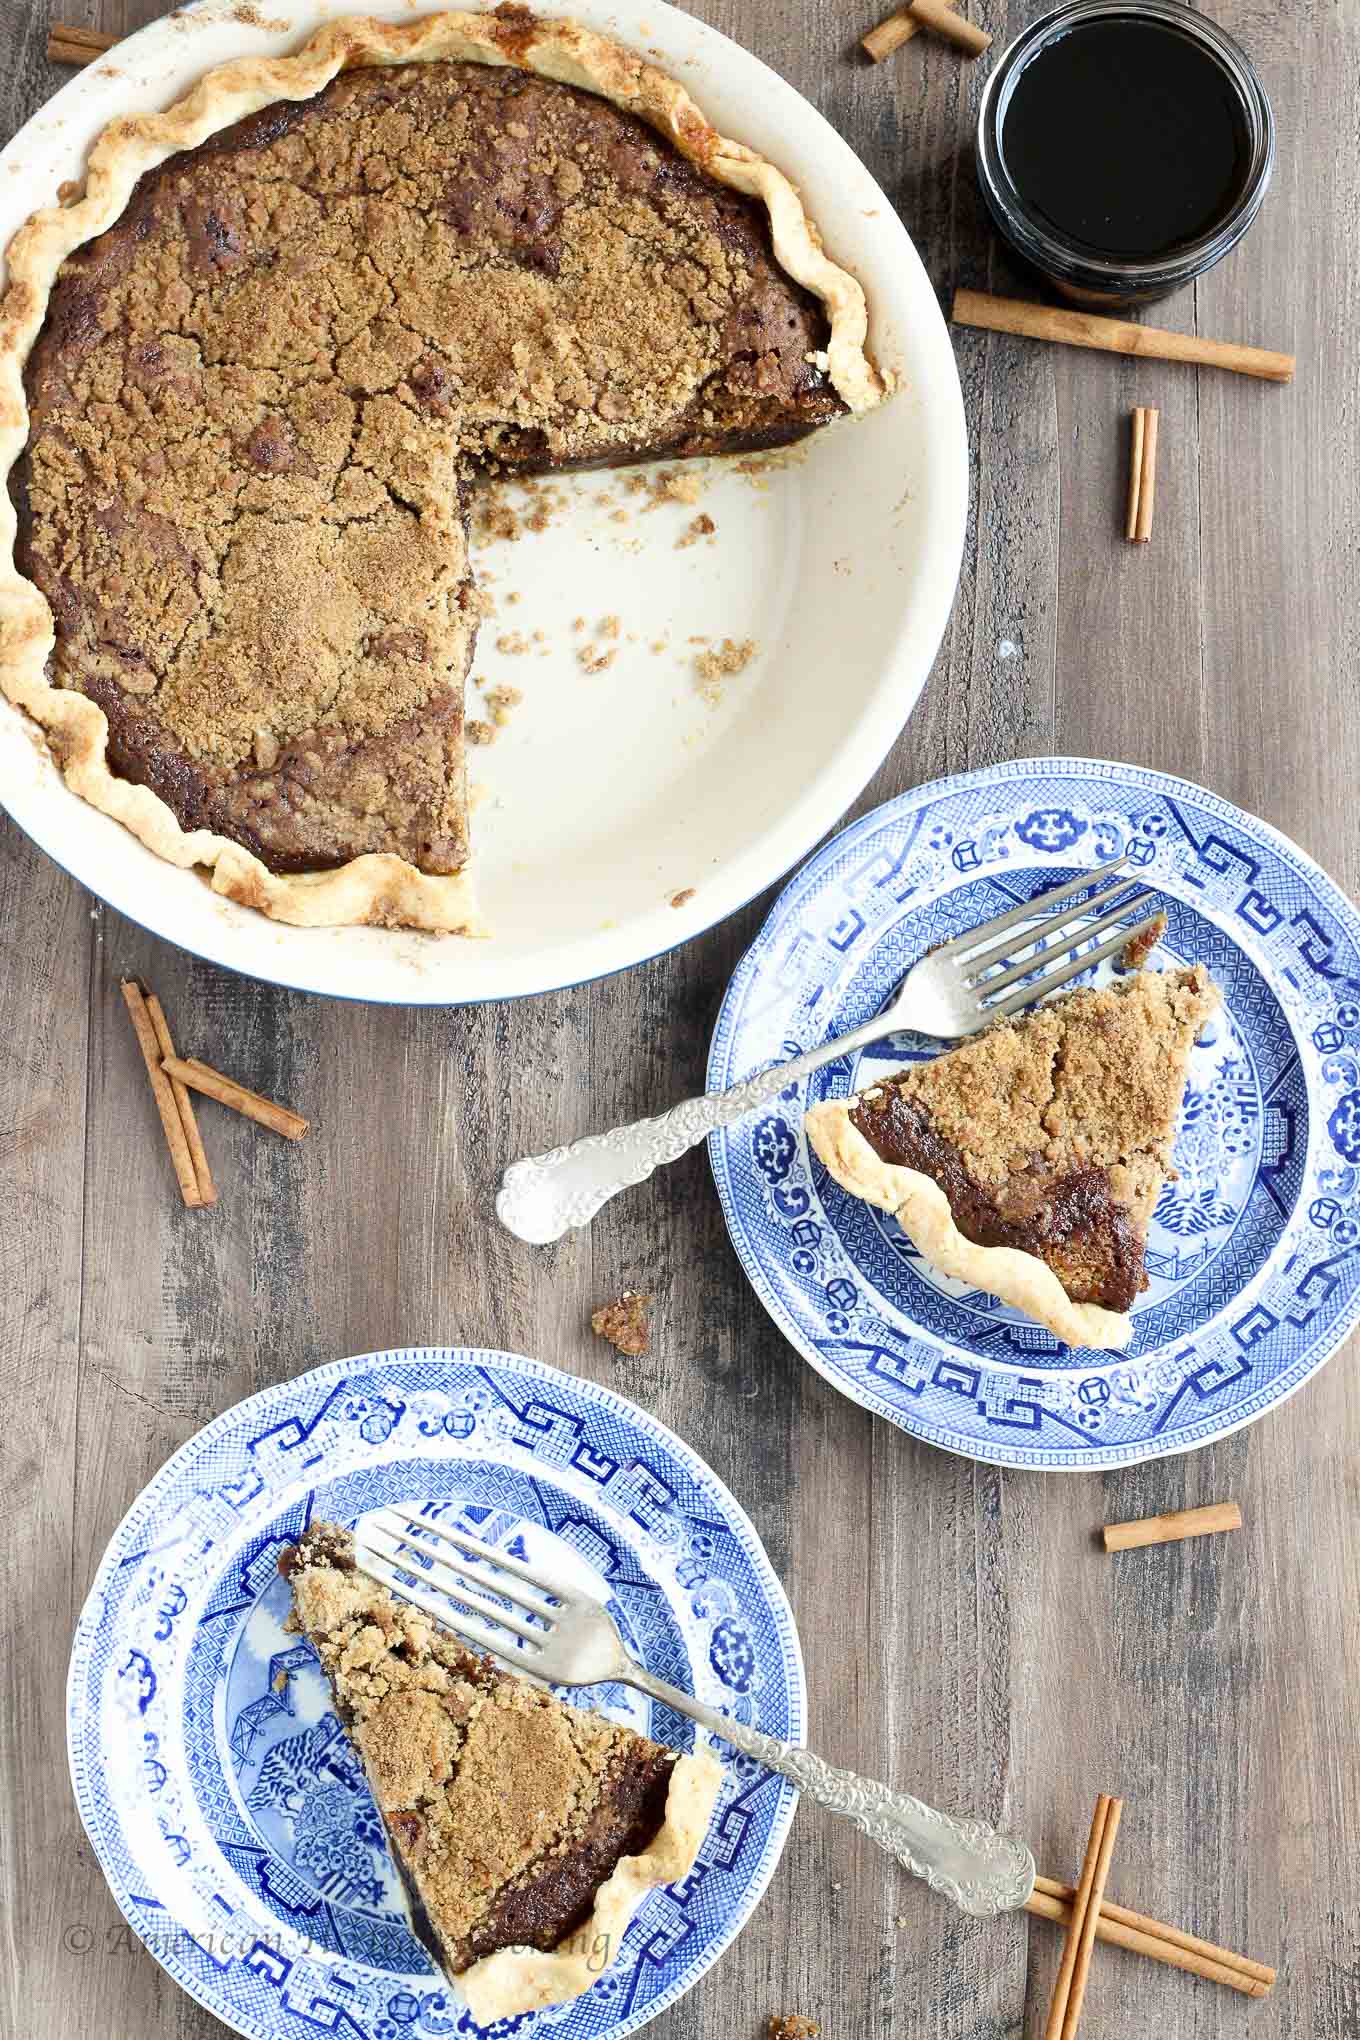  This shoofly pie has all the flavors of a molasses ginger cookie mixed with a buttery streusel in a flakey pastry crust. The rich, spicy, sweet filling just melts in your mouth bite after bite (slice after slice)